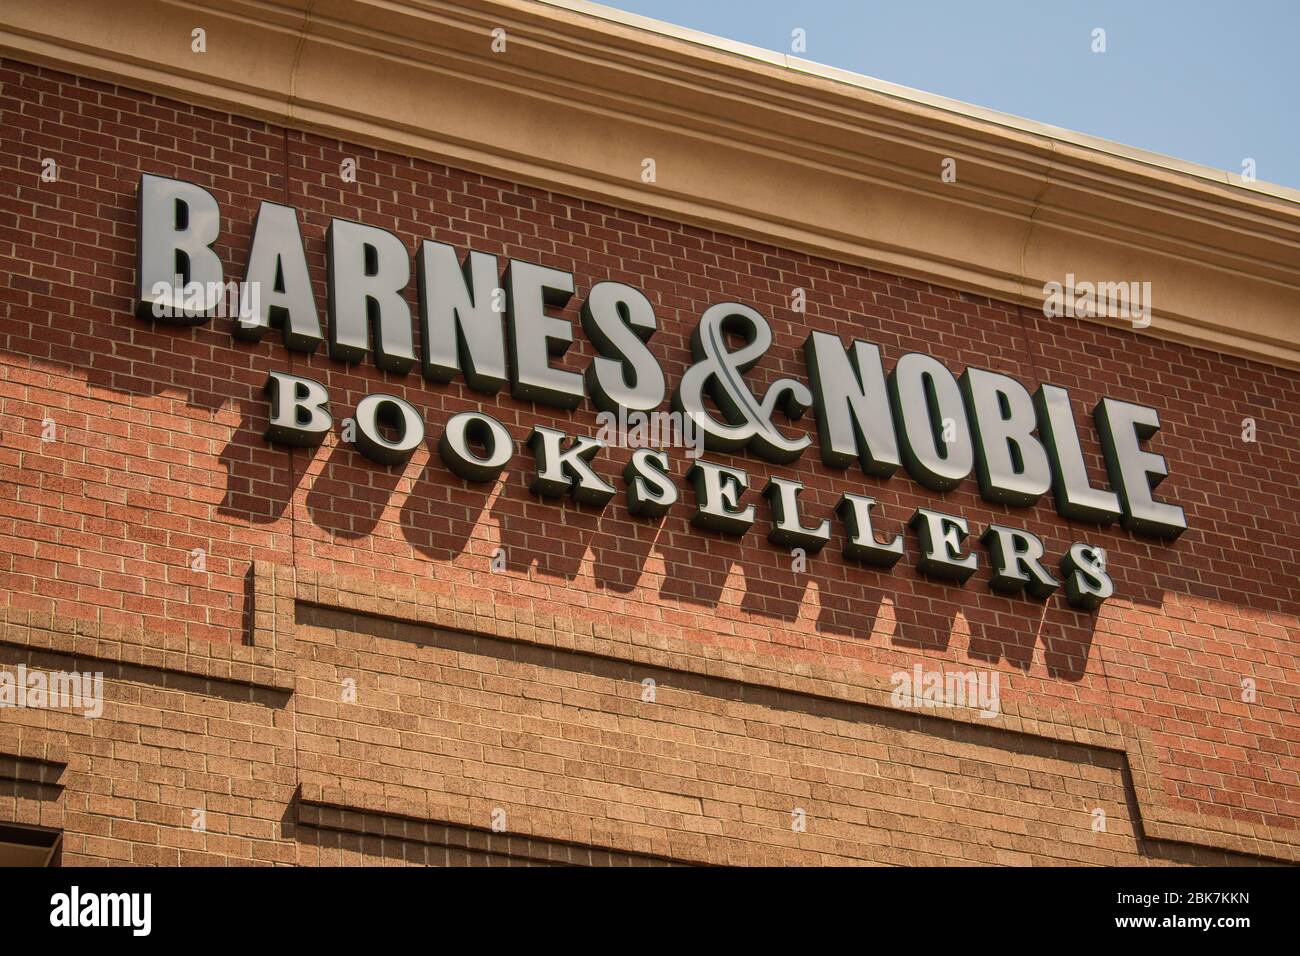 Horizontal daylight shot of 'Barnes & Noble Booksellers' brand and logo on facade of their bookstore. Stock Photo